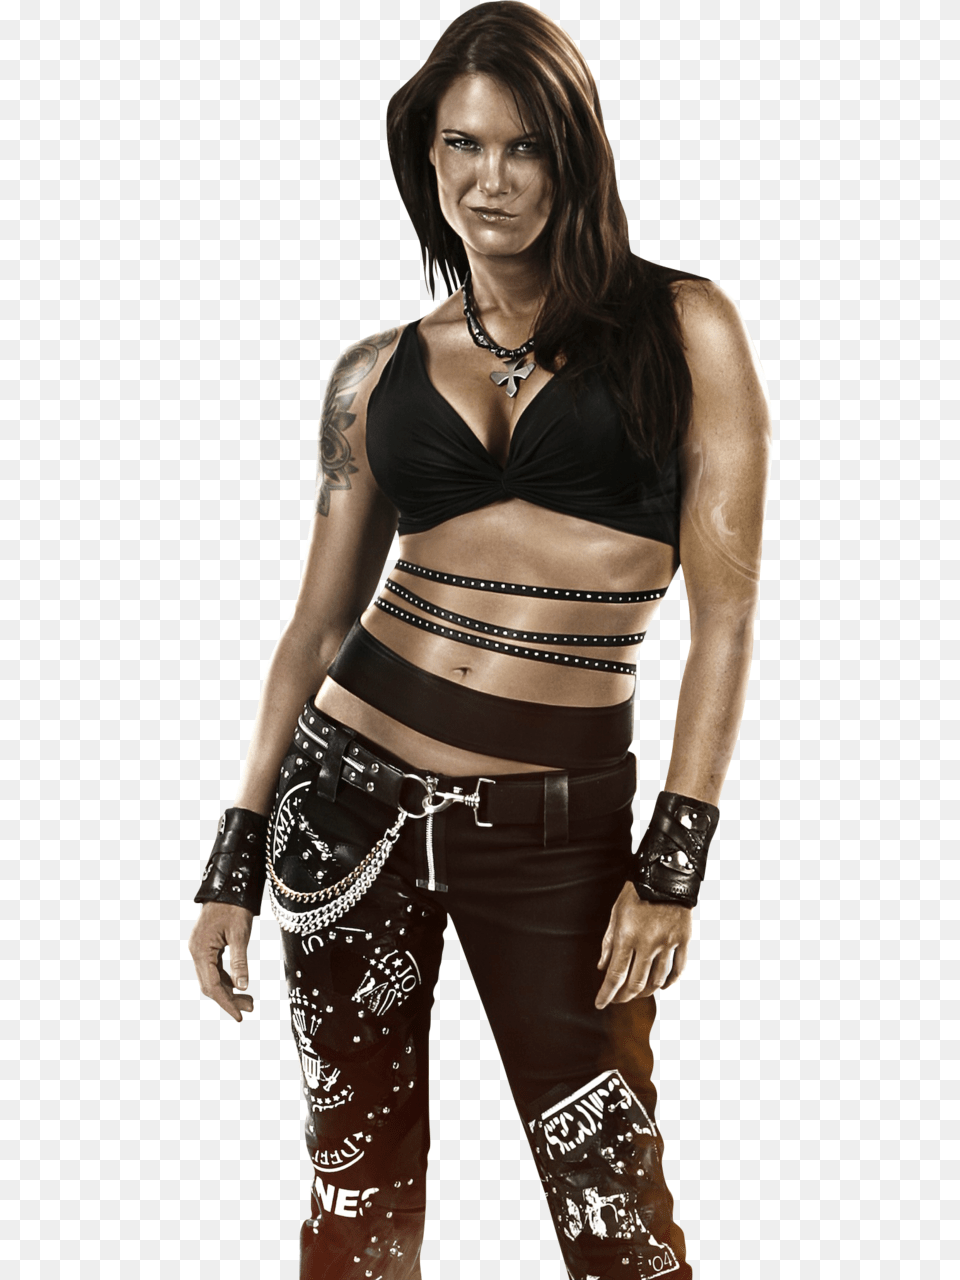 Images About Wwe On We Heart It Wwe 2k14 Lita, Woman, Adult, Person, Clothing Png